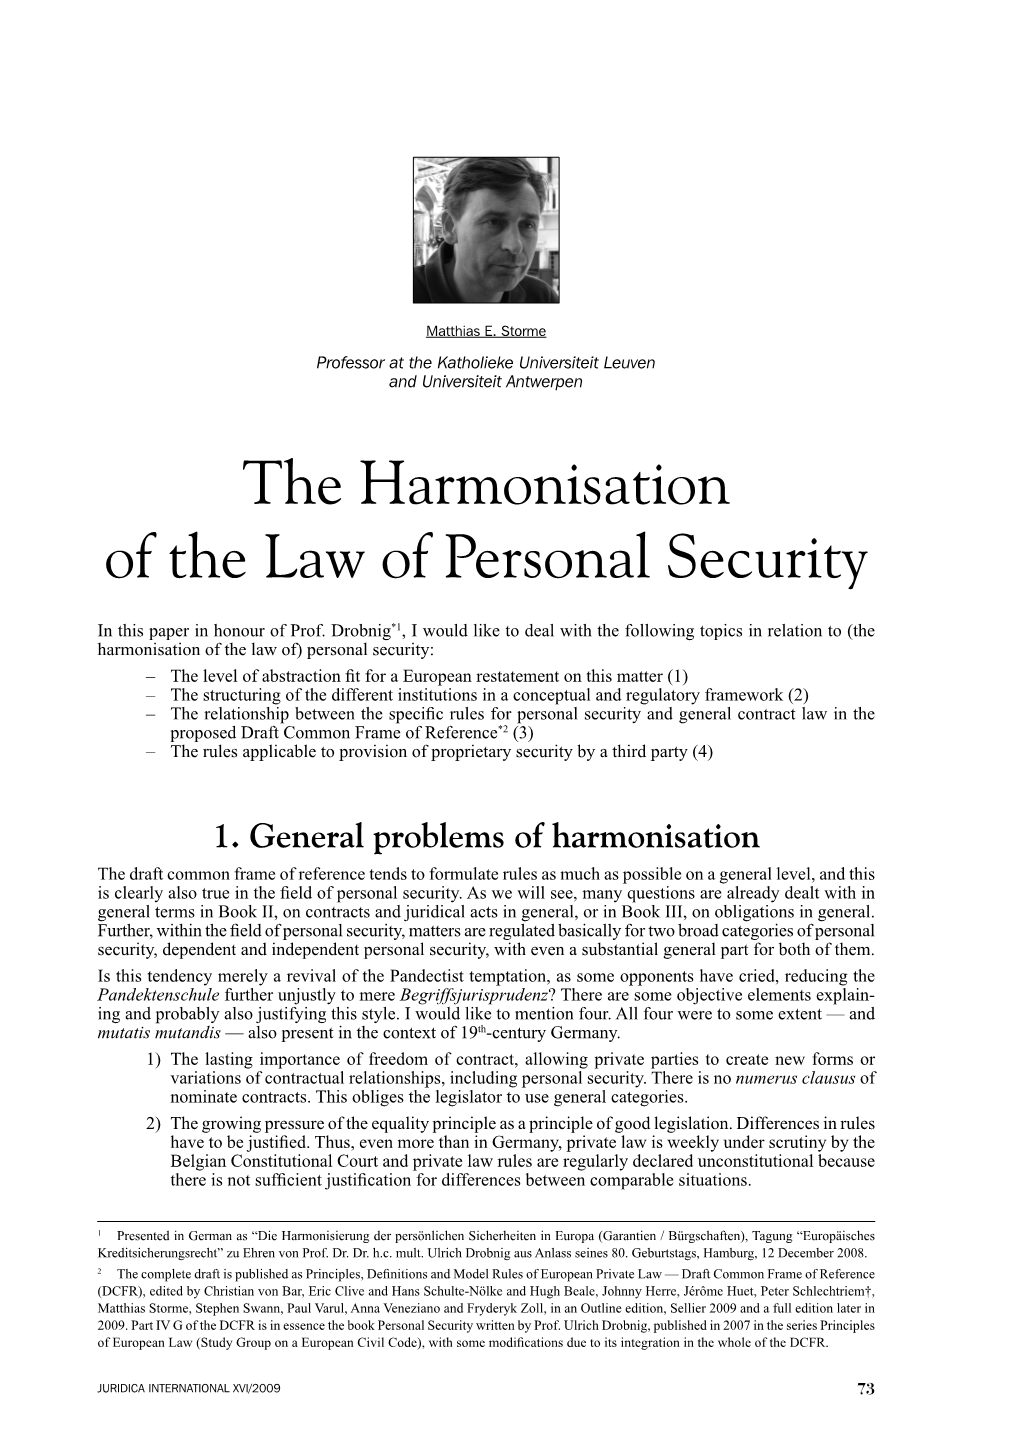 The Harmonisation of the Law of Personal Security